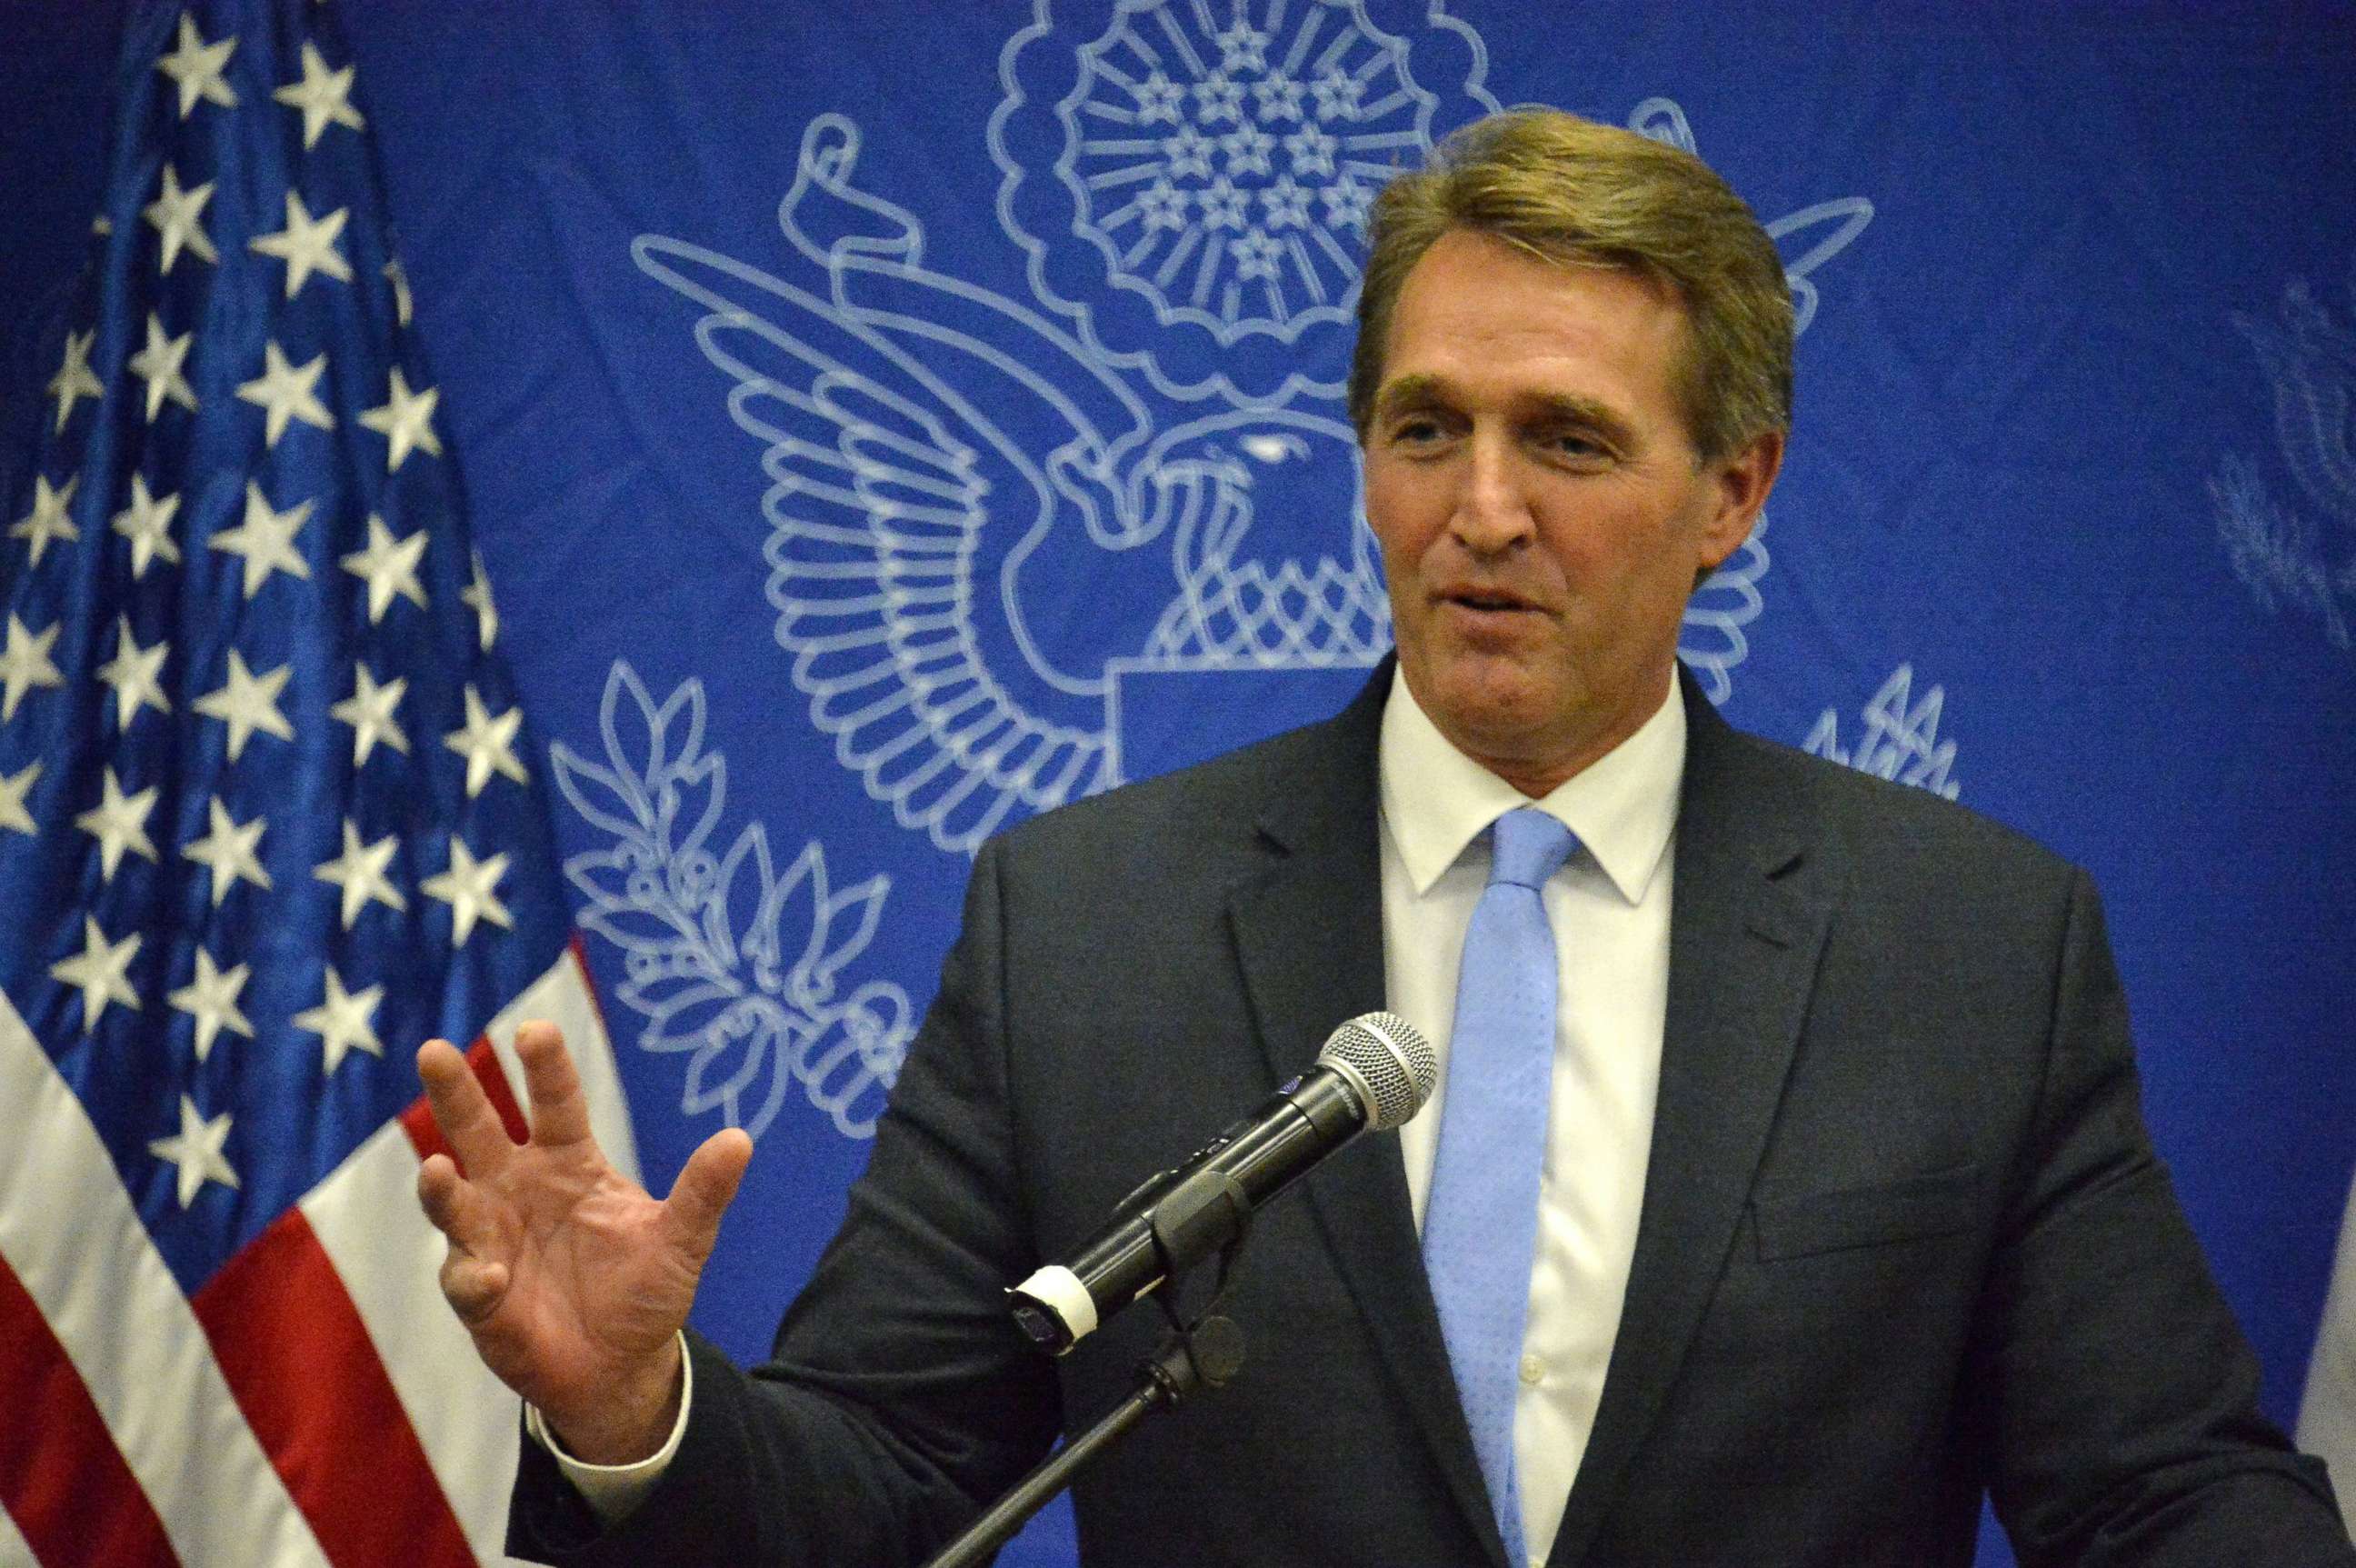 PHOTO: Sen. Jeff Flake delivers a message to the media in the Benjamin Franklin library at the U.S. embassy in Mexico City, Nov. 22, 2016.